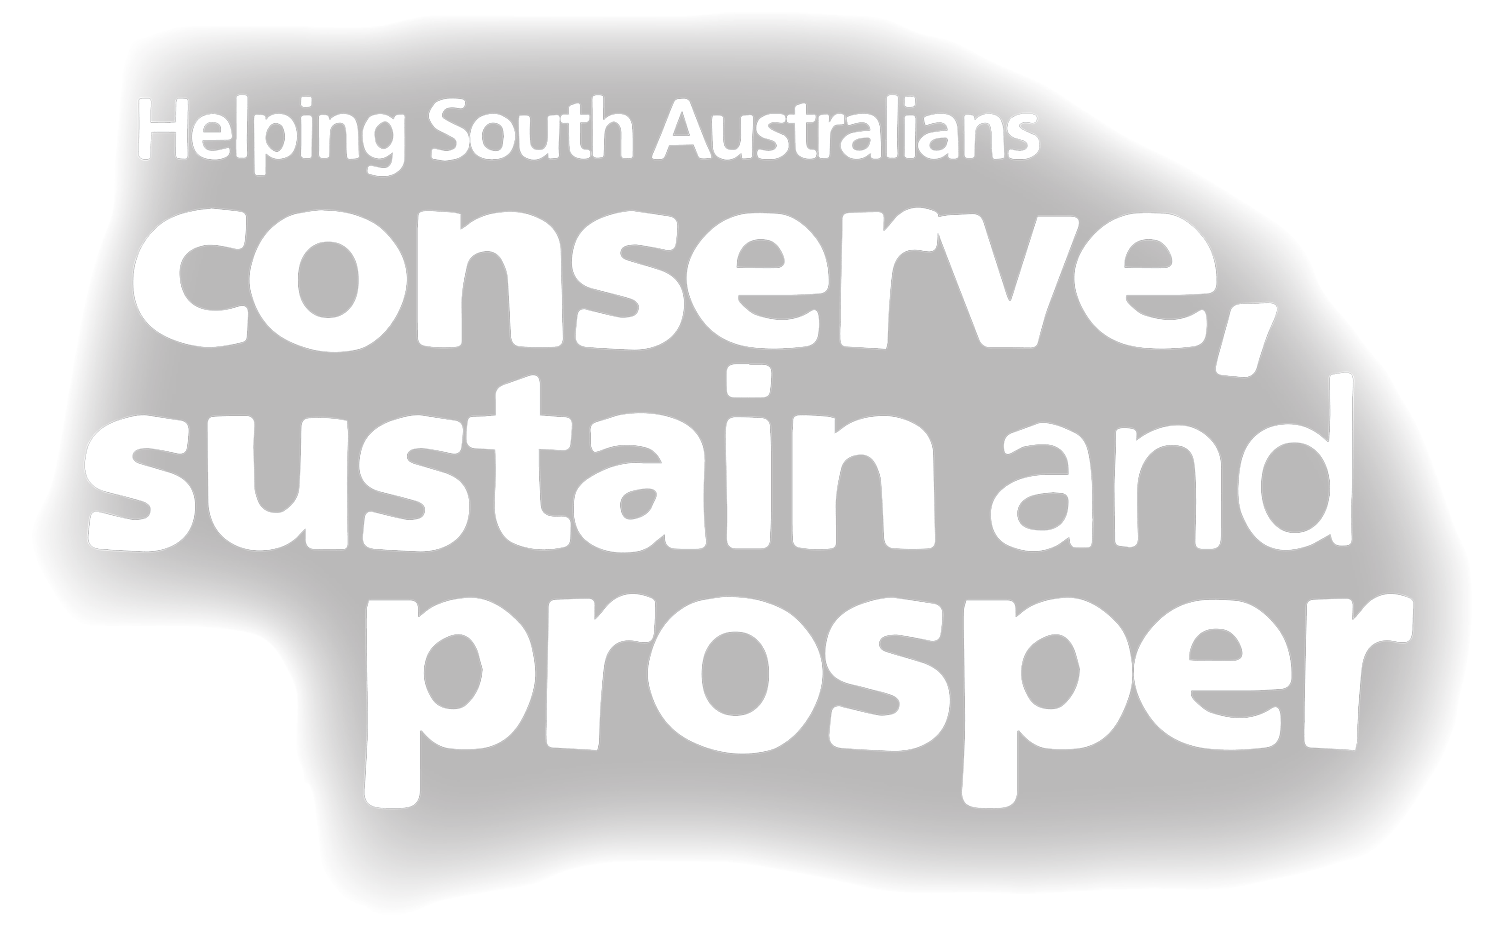 Helping South Australians Conserve Sustain and Prosper